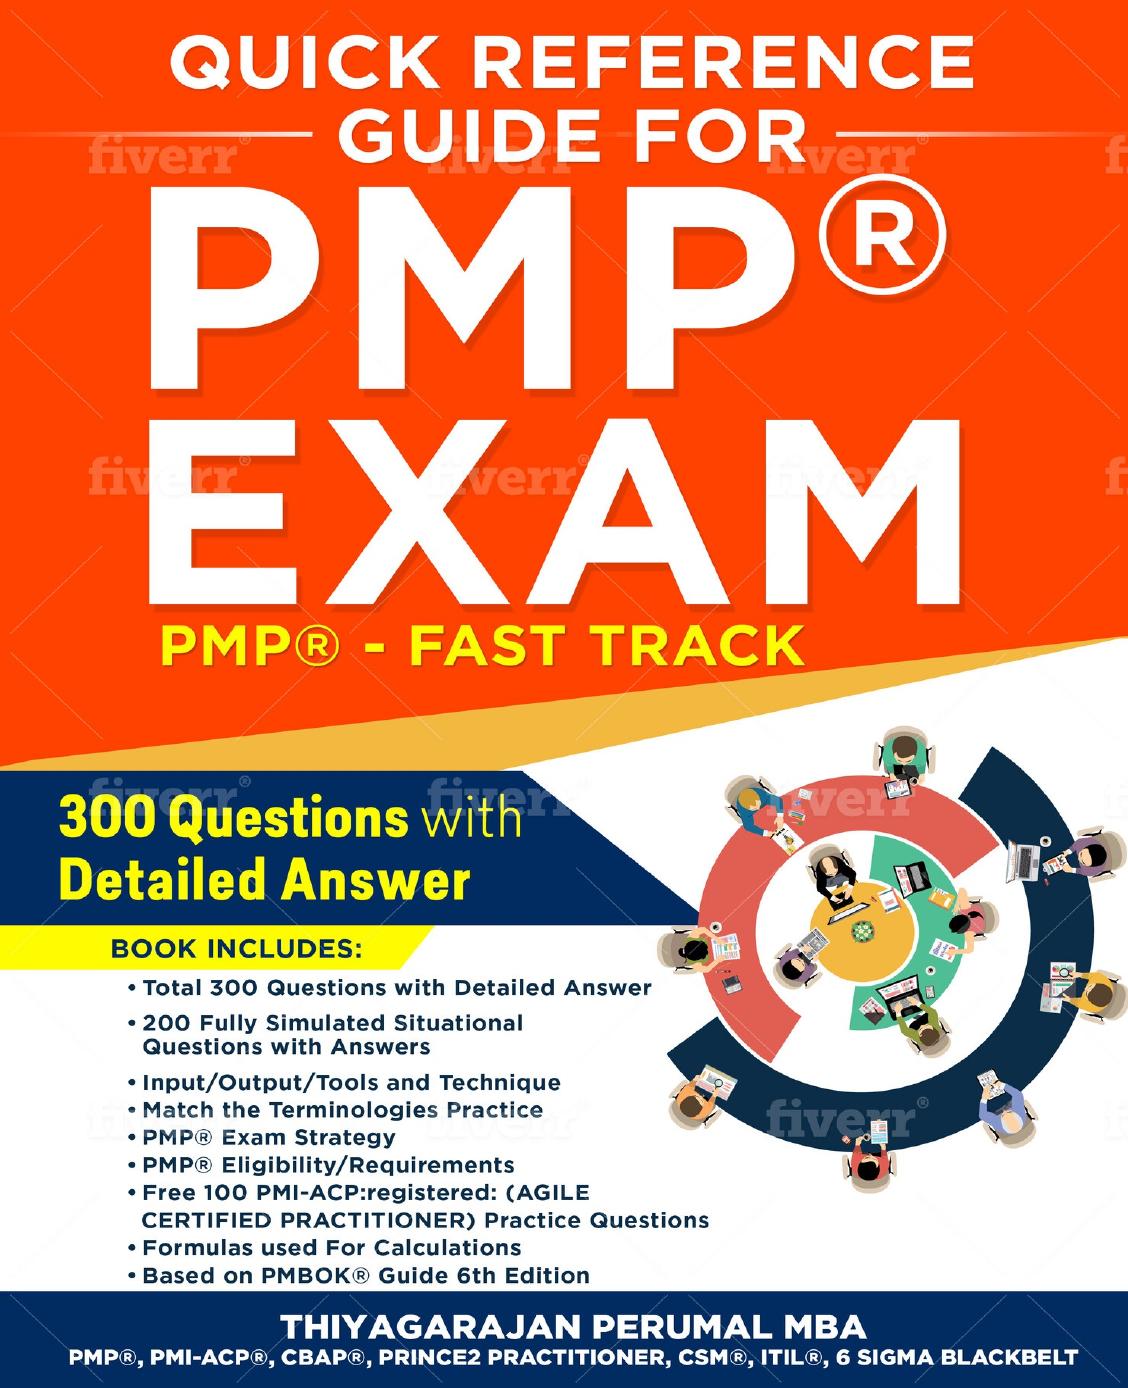 Quick Reference Guide For PMP® Exam: PMP® Fast Track (PMP® Exam Study Guide Book 1)